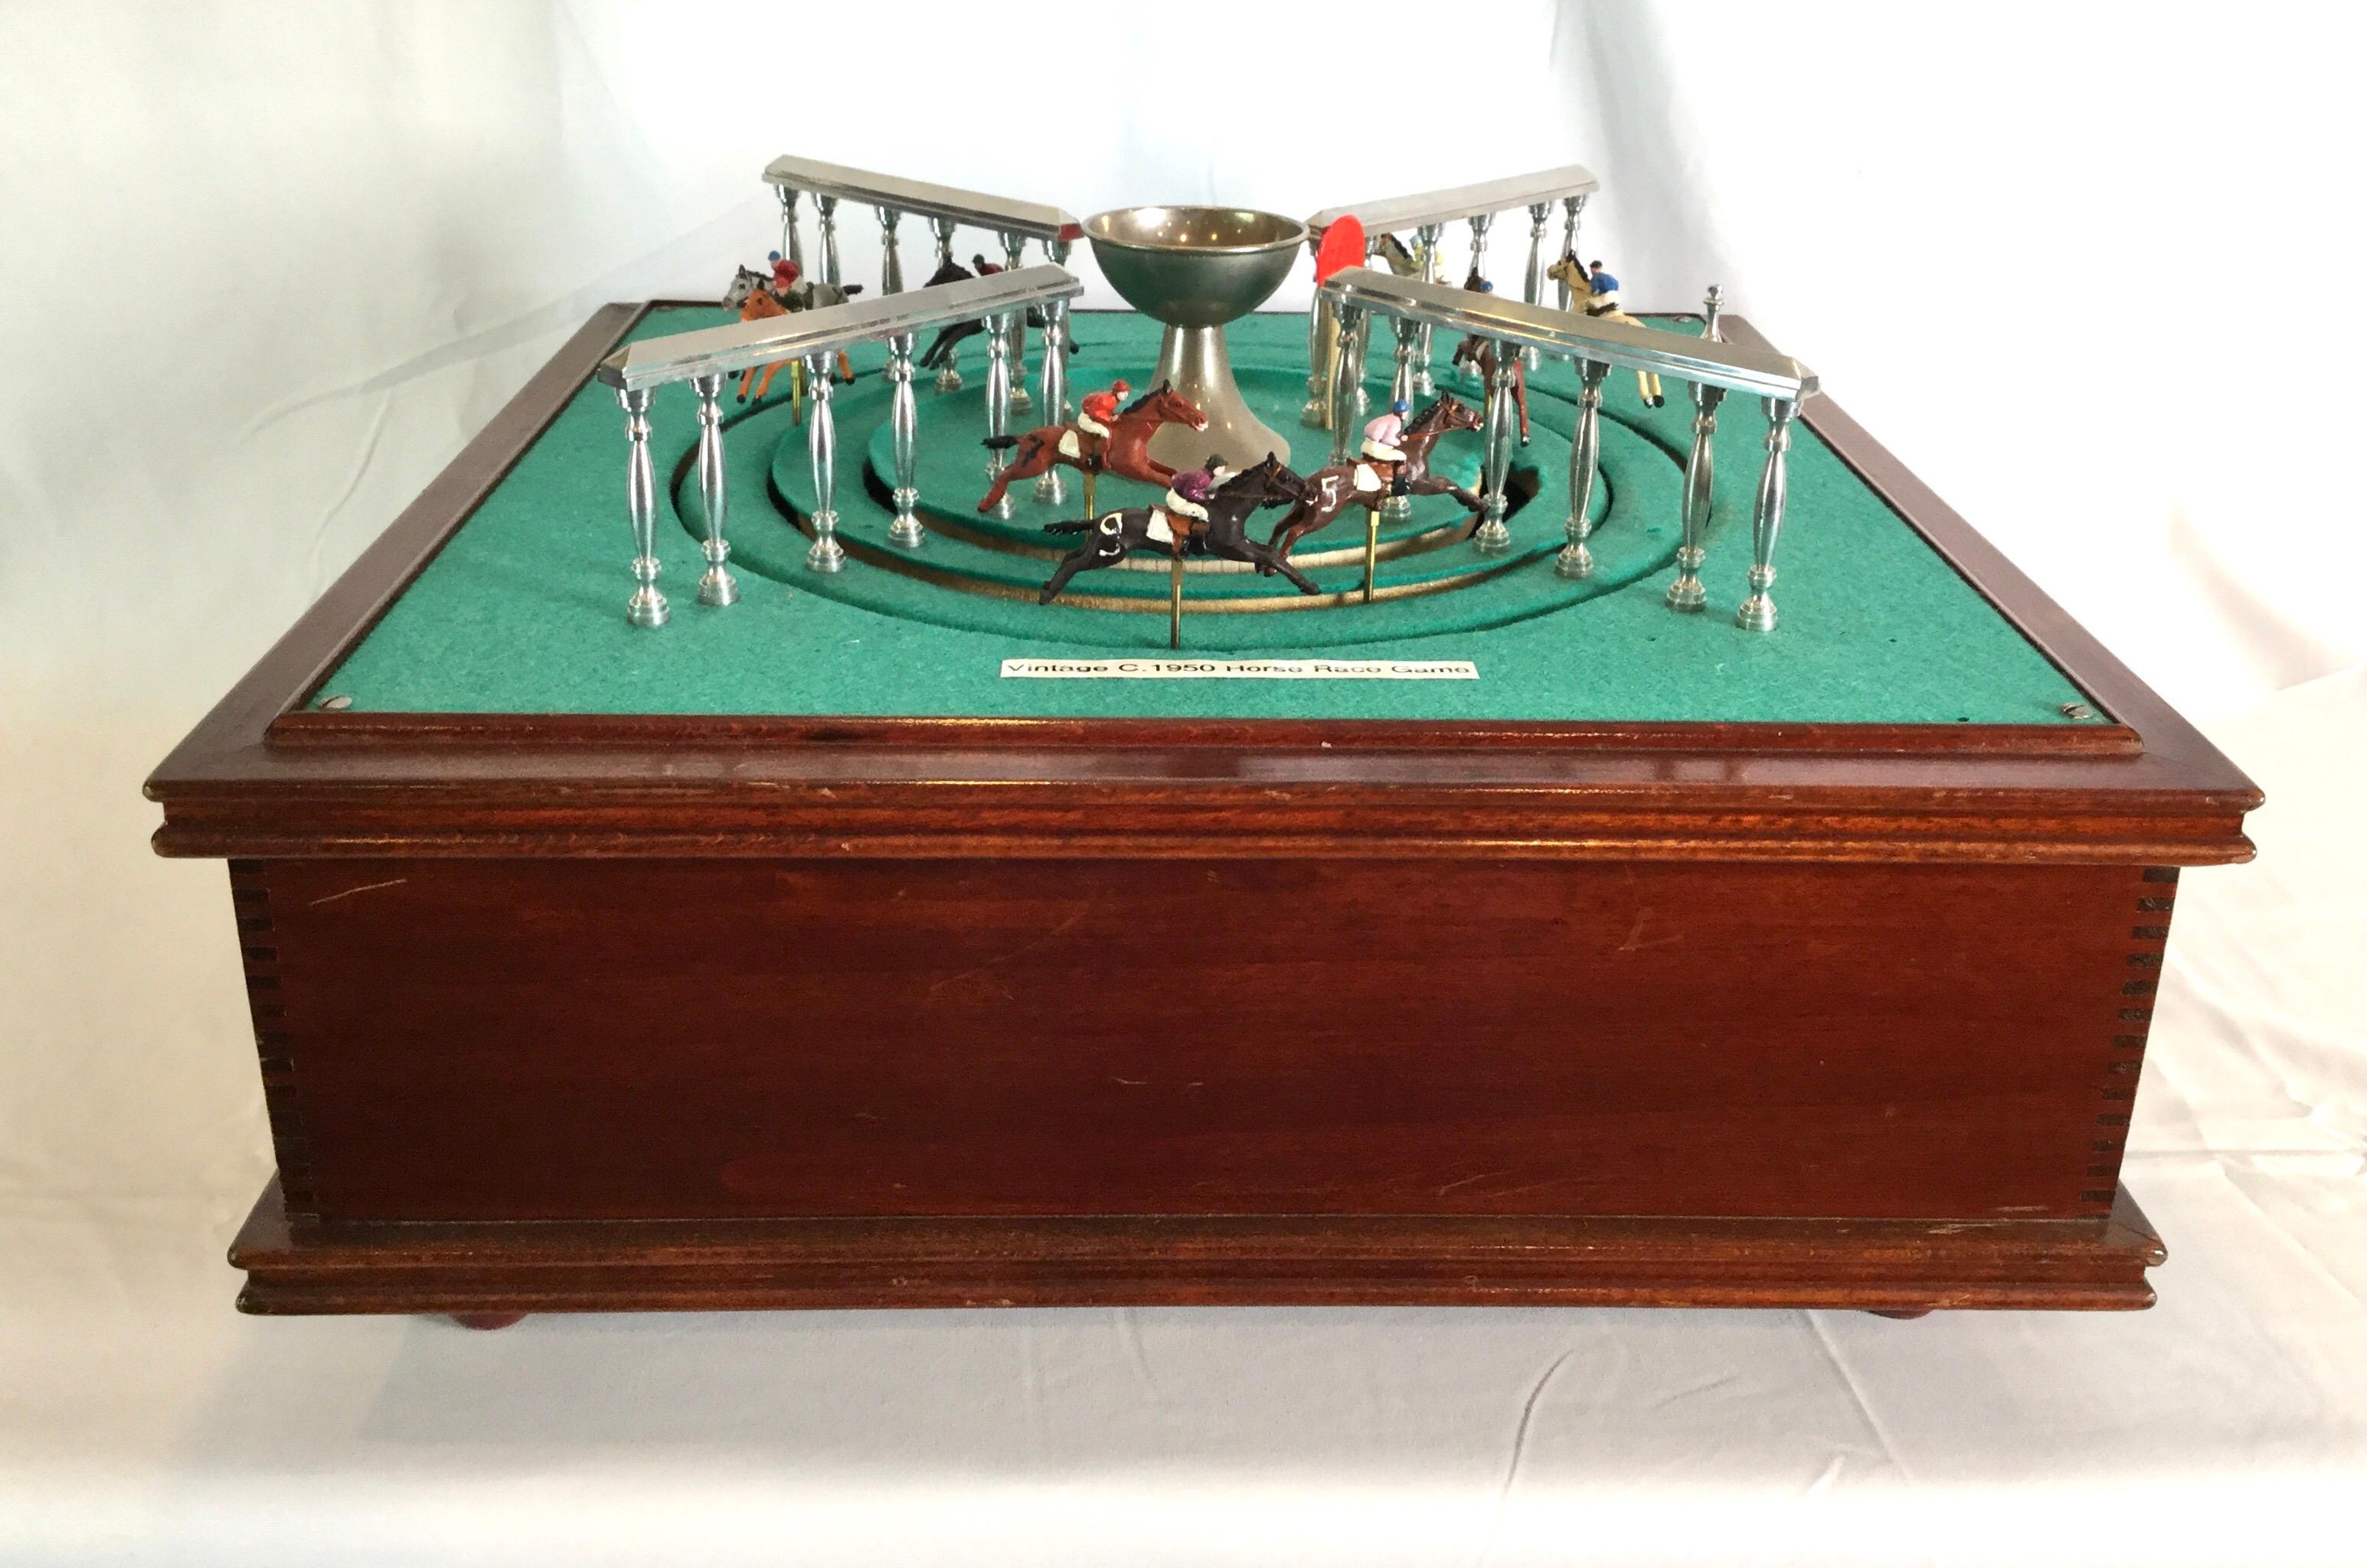 Vintage key wind horse race game from the 1950s. Good working condition. Green felt on top has wear from age and use.